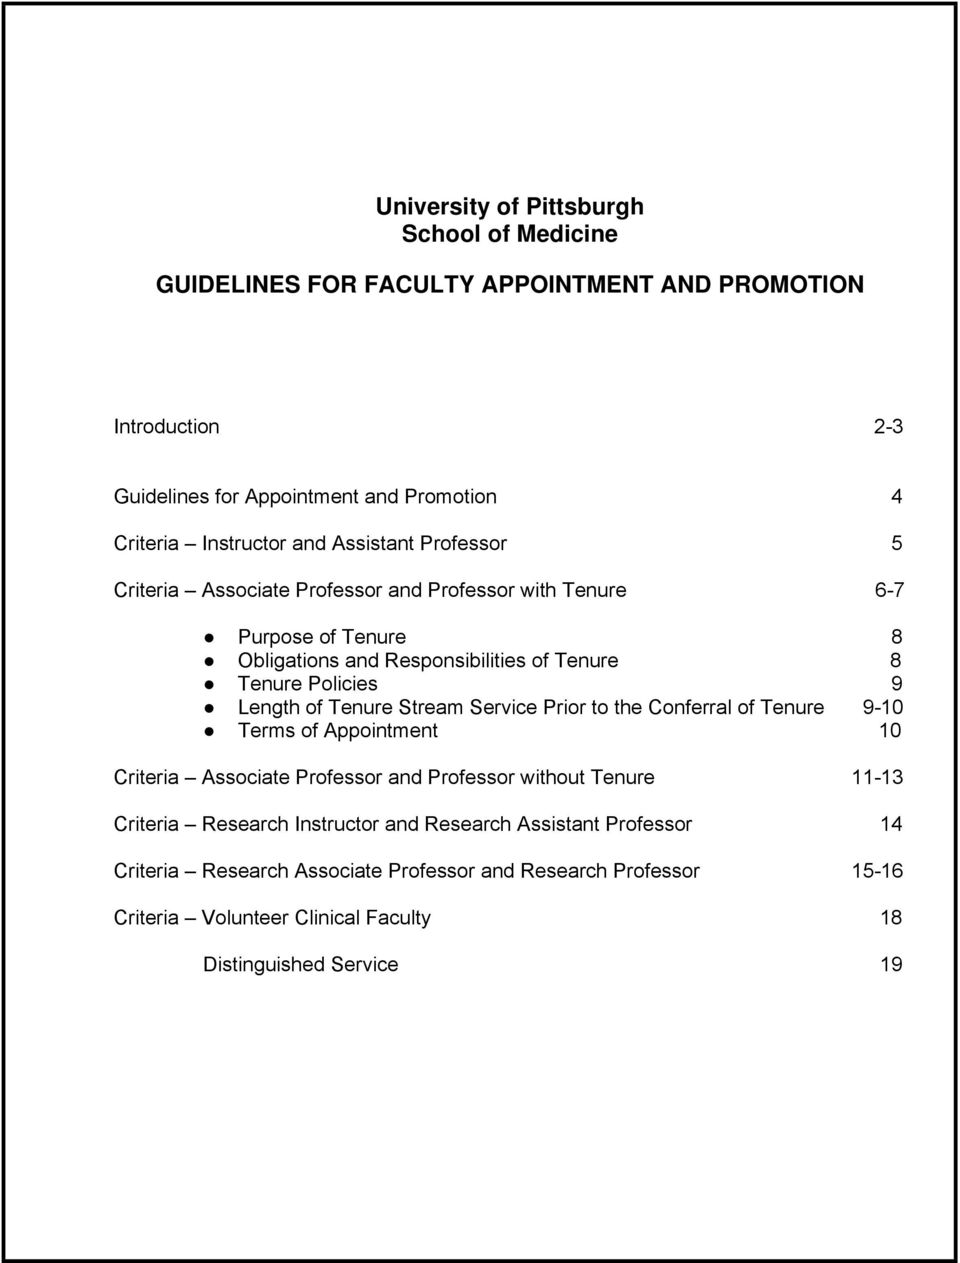 Length of Tenure Stream Service Prior to the Conferral of Tenure 9-10 Terms of Appointment 10 Criteria Associate Professor and Professor without Tenure 11-13 Criteria